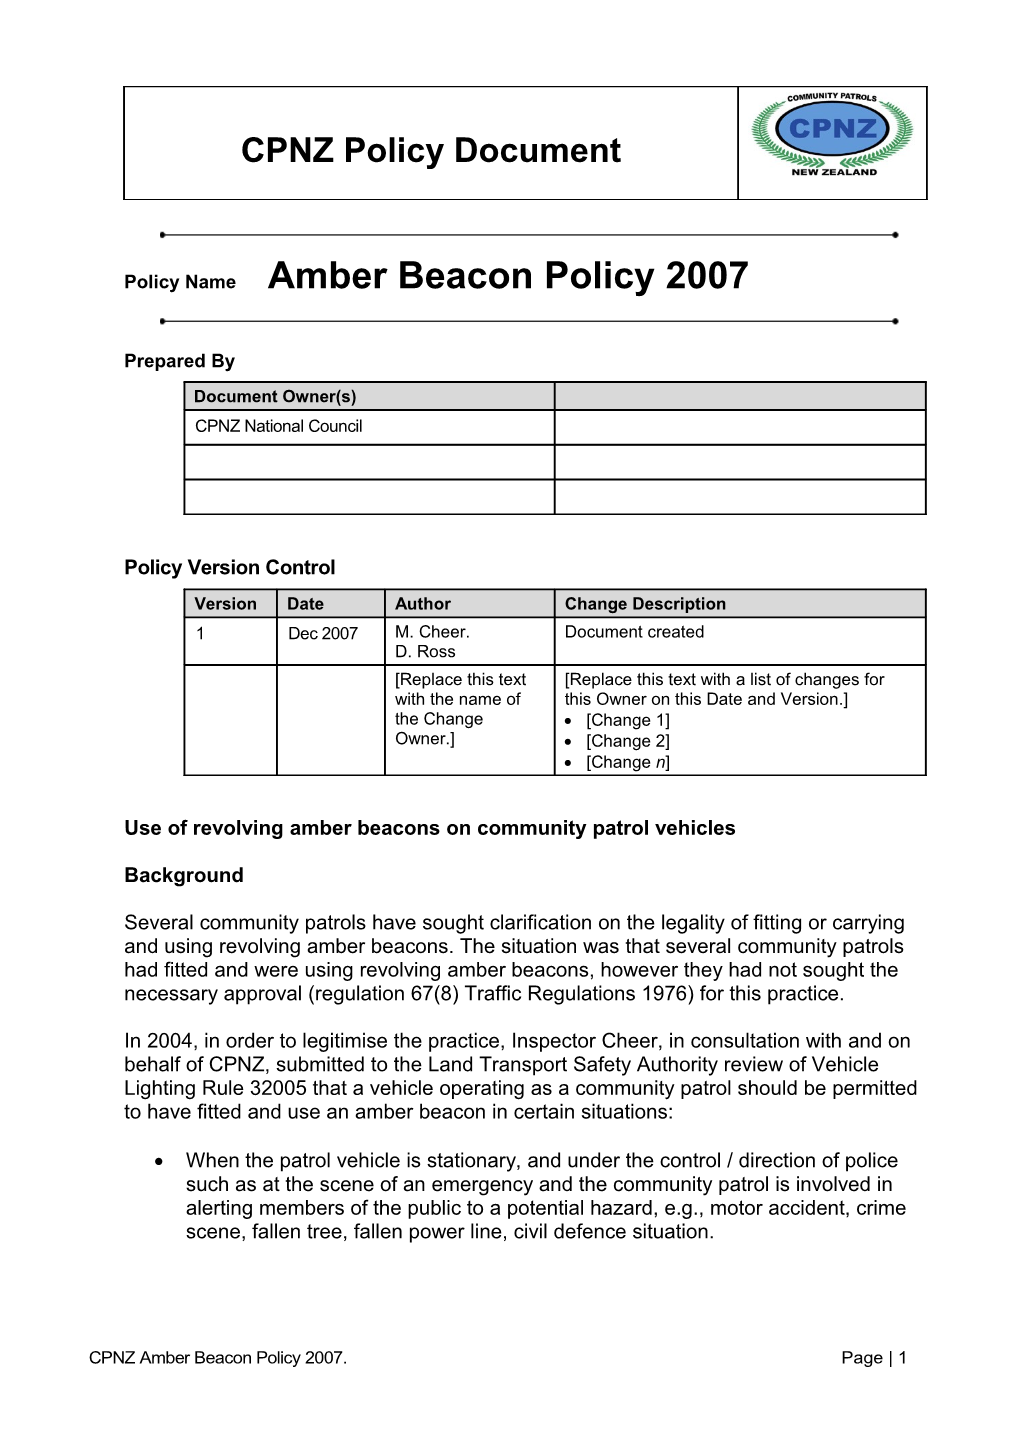 Policy Name Amber Beacon Policy 2007